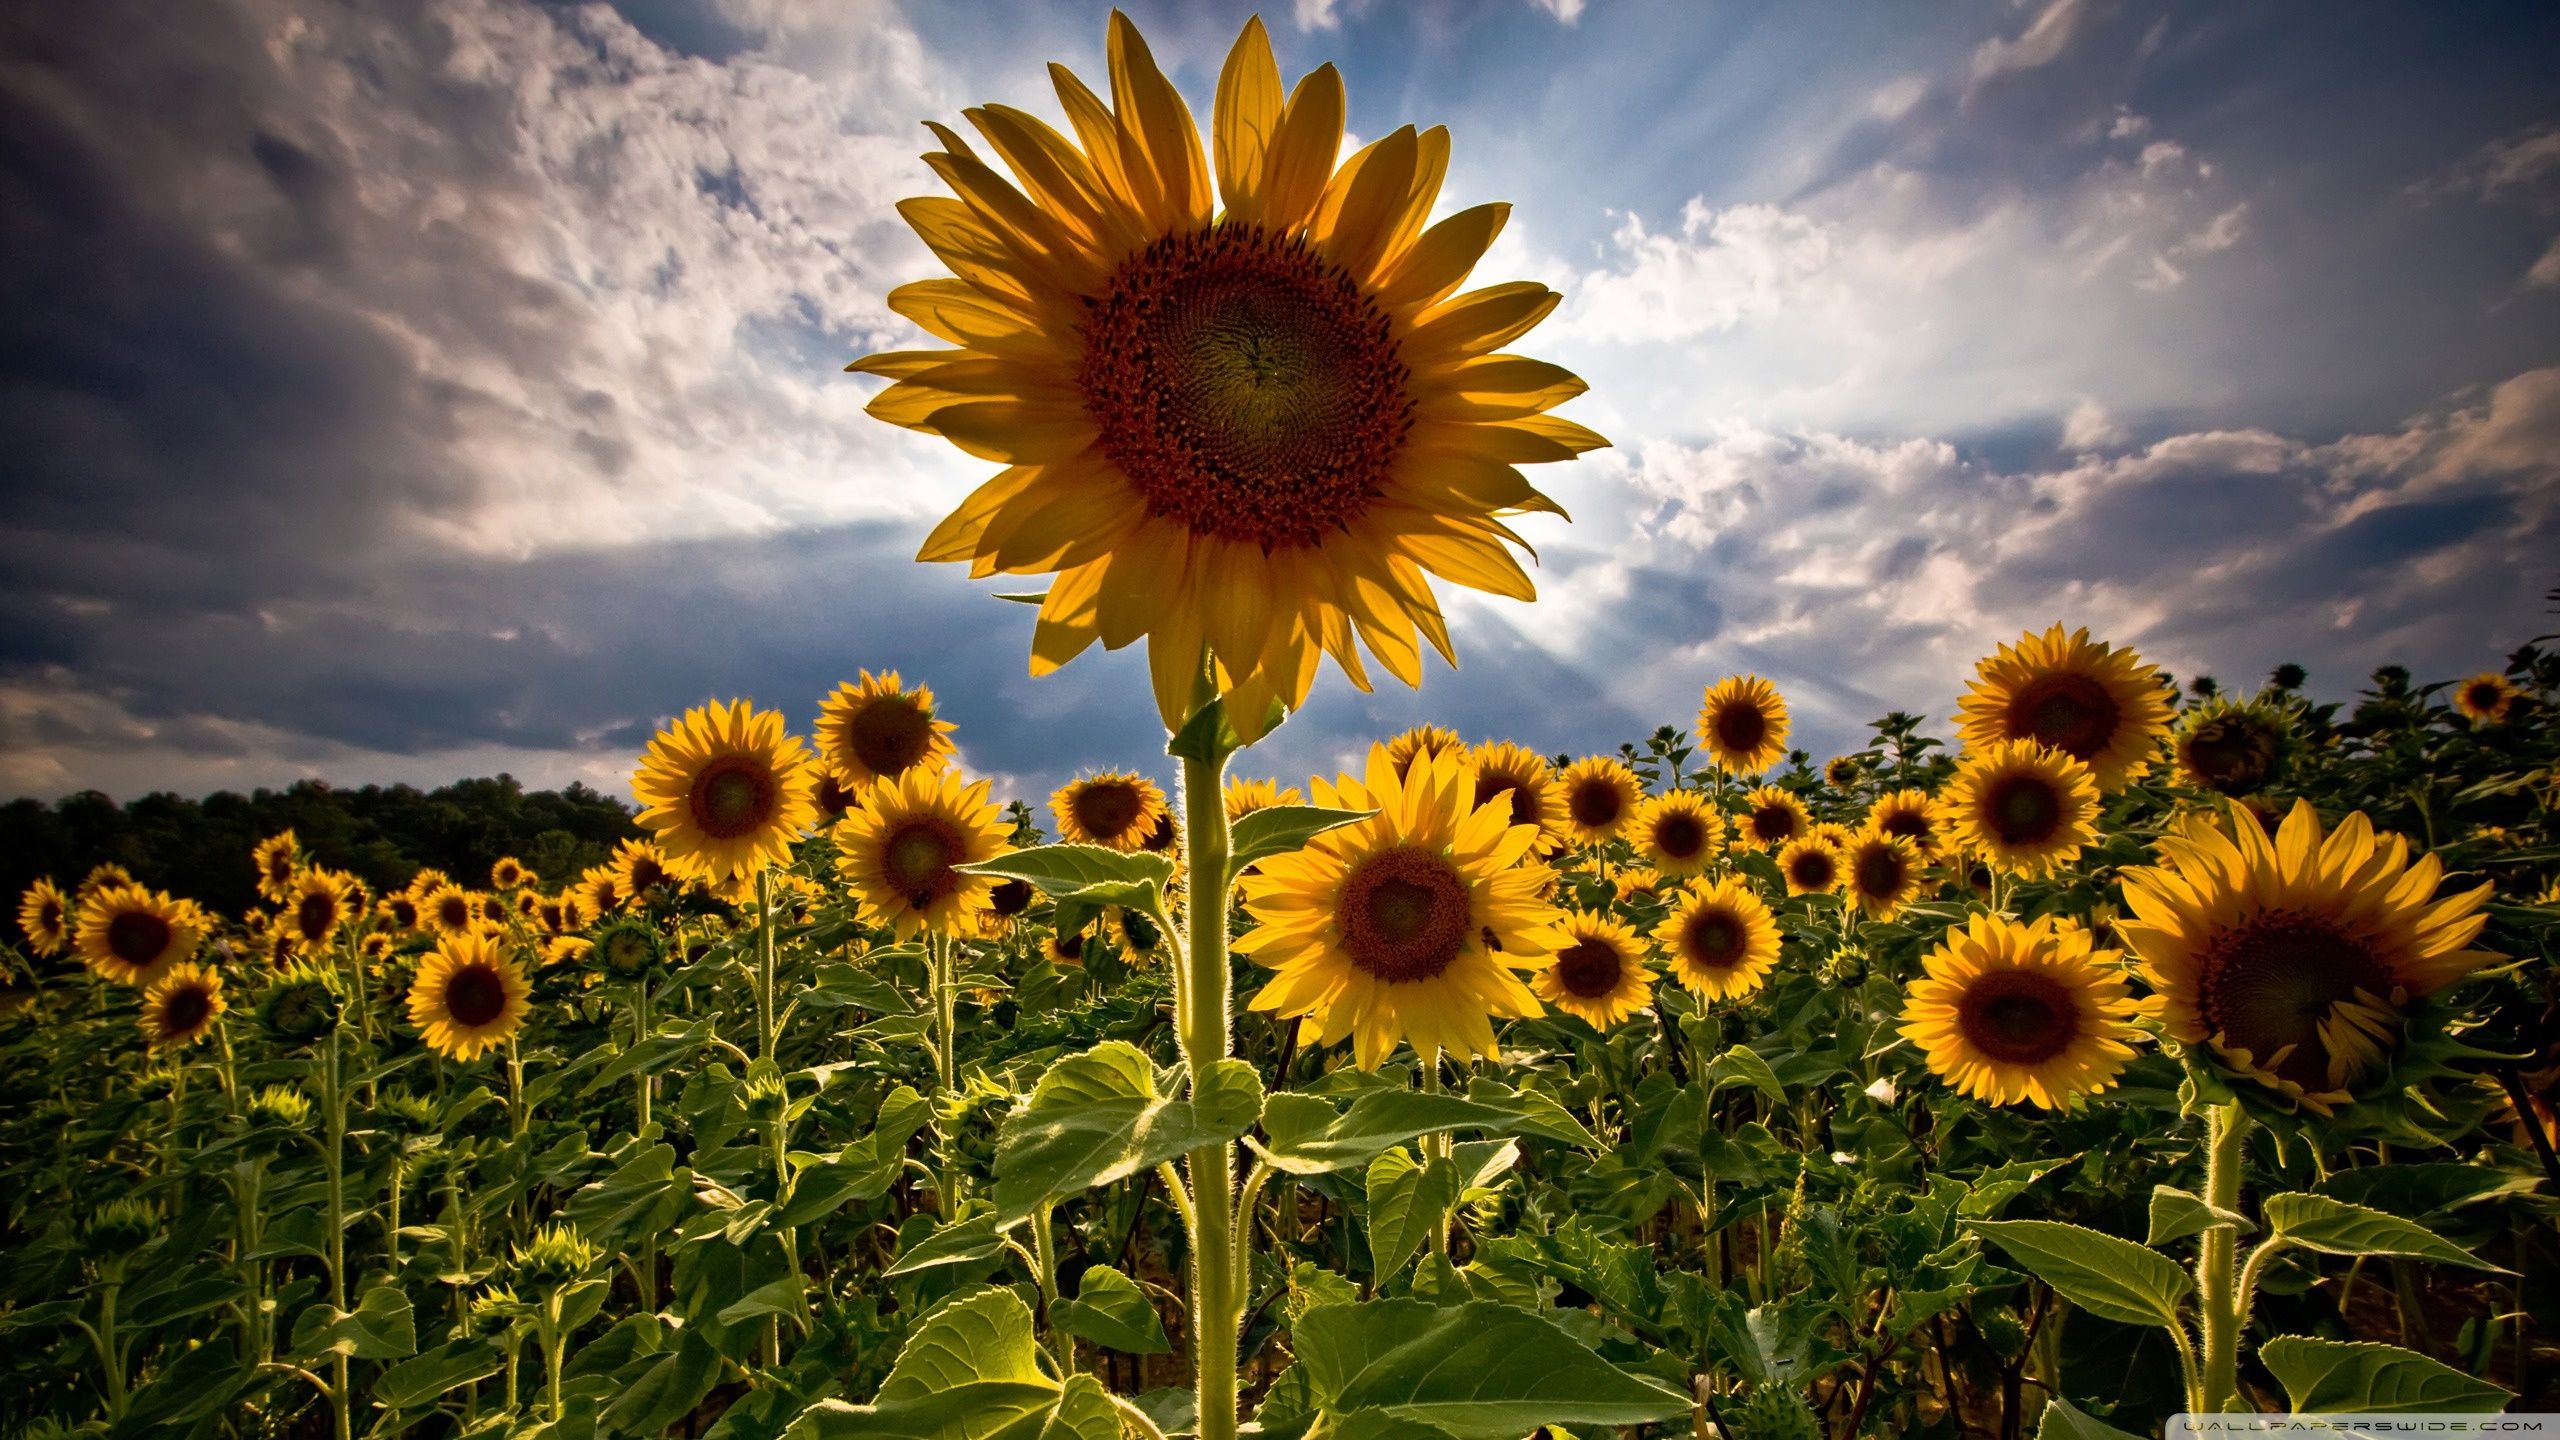 Sunflower HD Wallpaper For Android